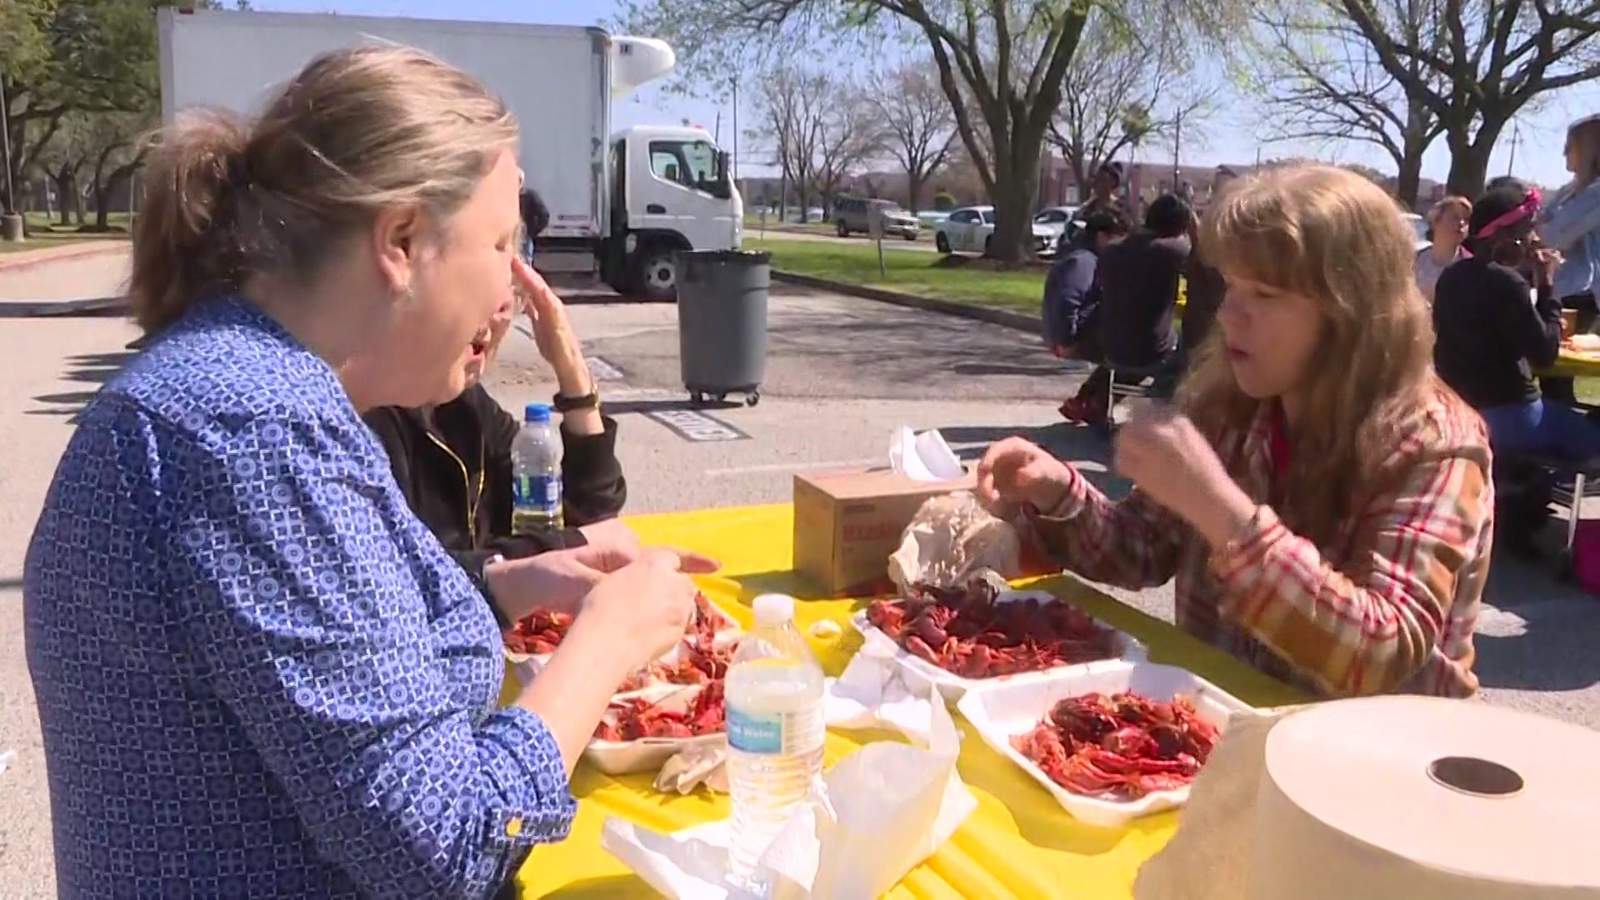 Alief Hastings organize crawfish boil fundraiser to help recovering student